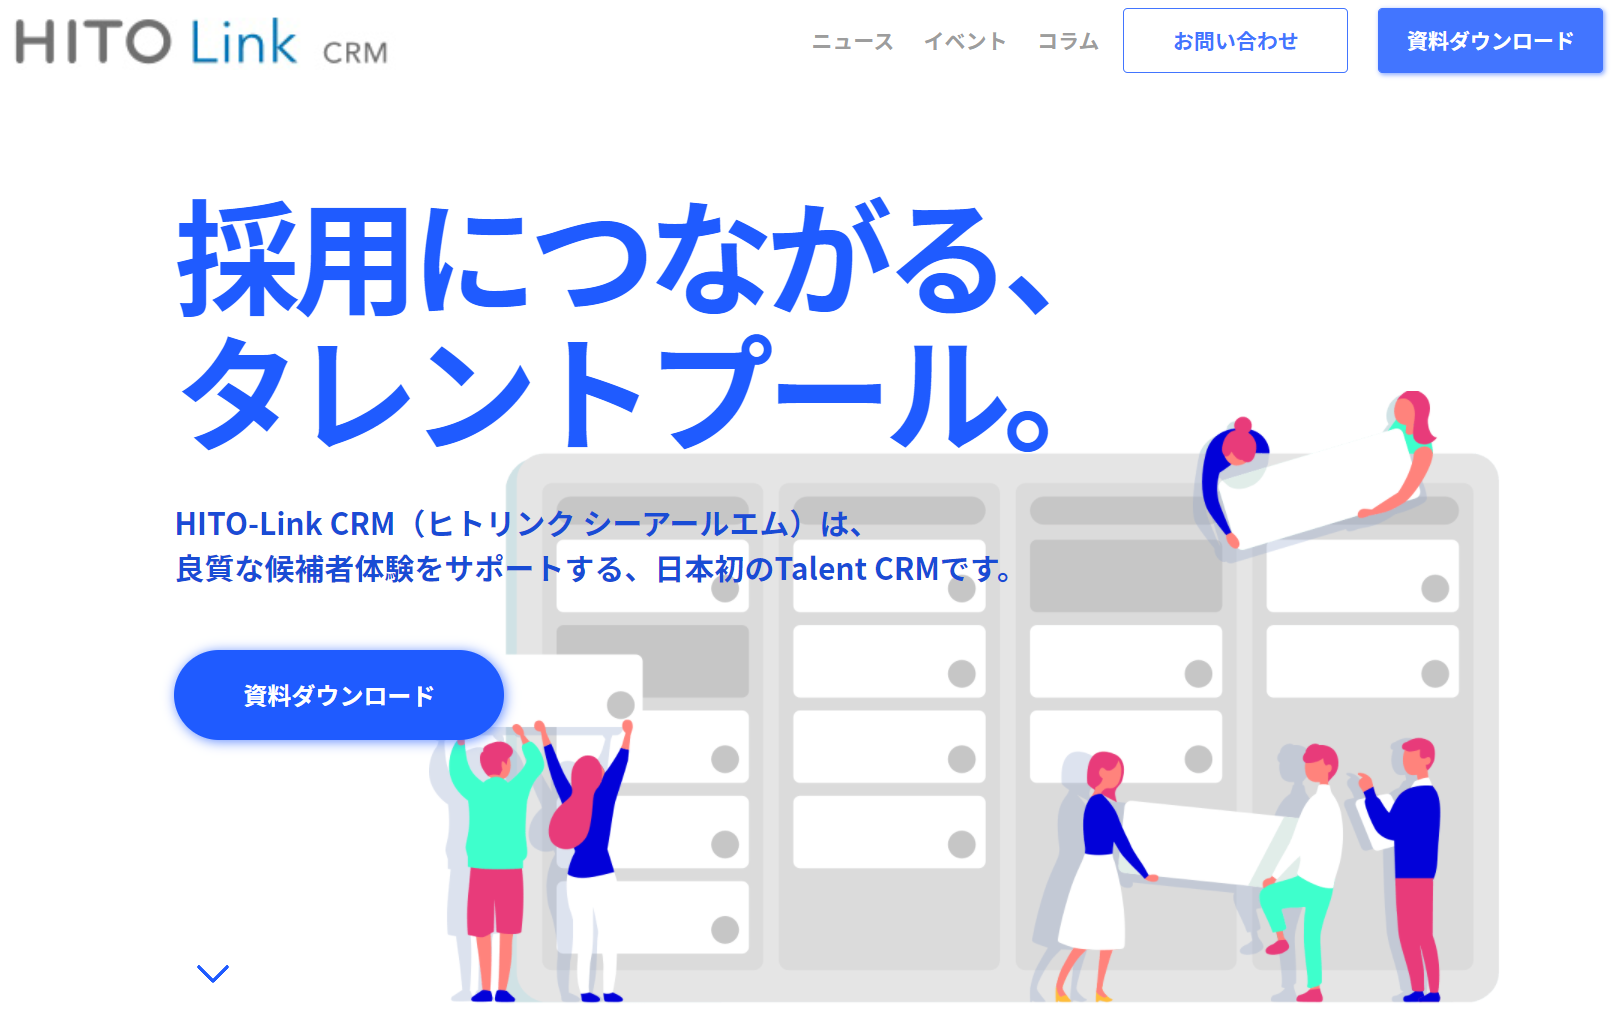 HITO-Link CRM